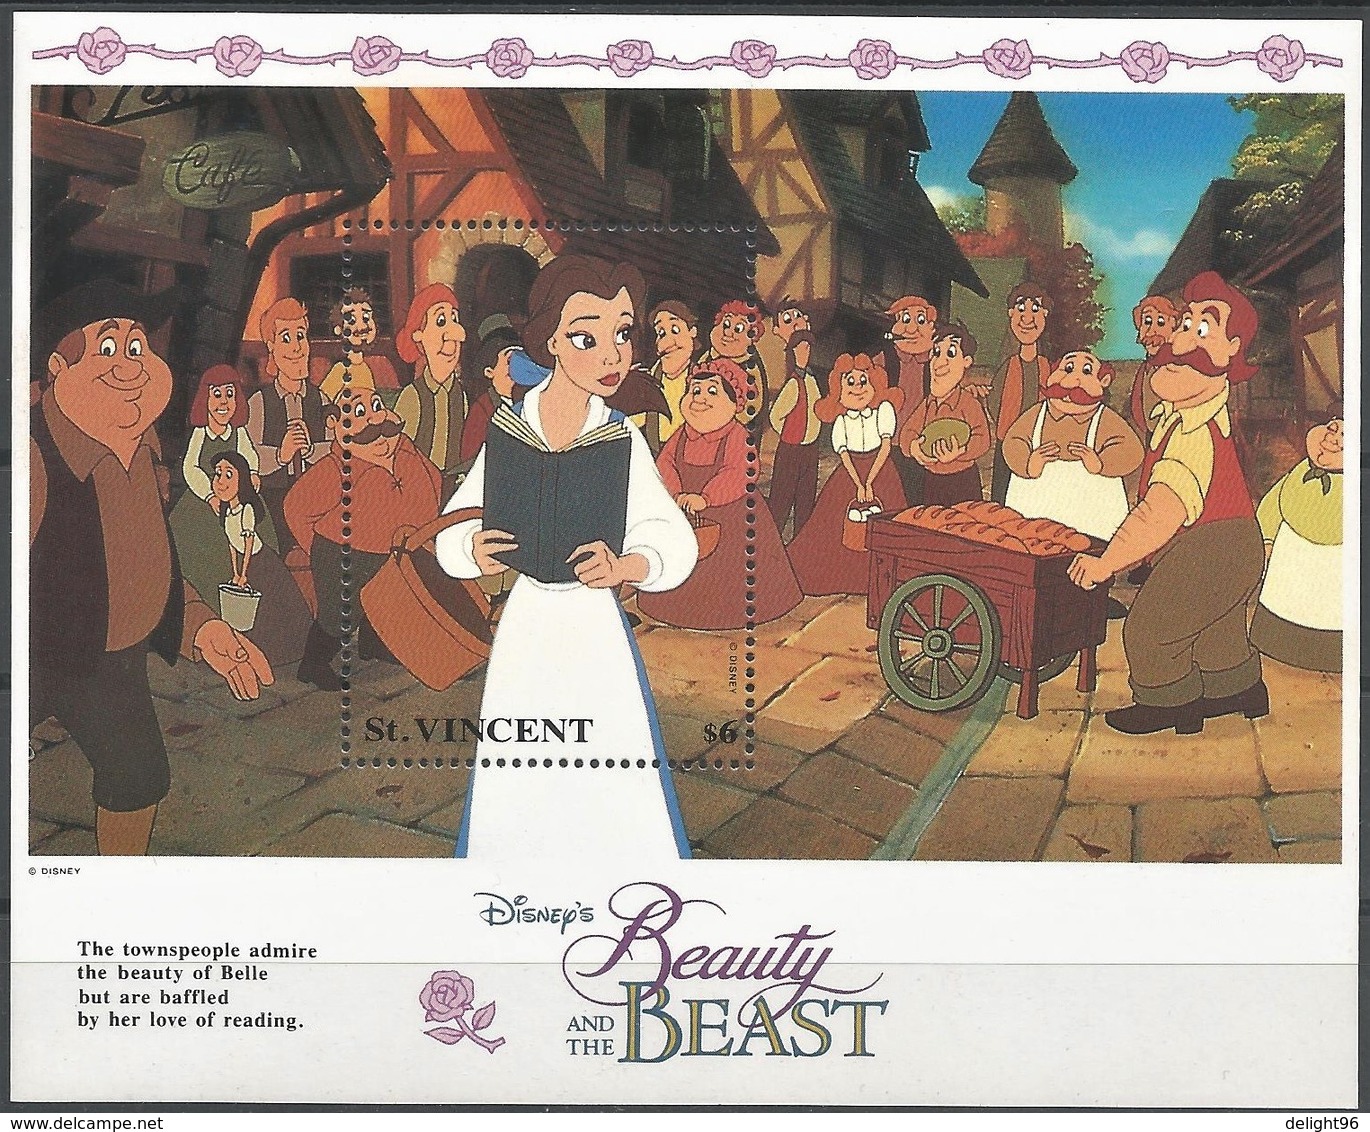 1992 St. Vincent Disney Movie: The Beauty and the Beast Set, Minisheets and Souvenir Sheets (** / MNH / UMM)